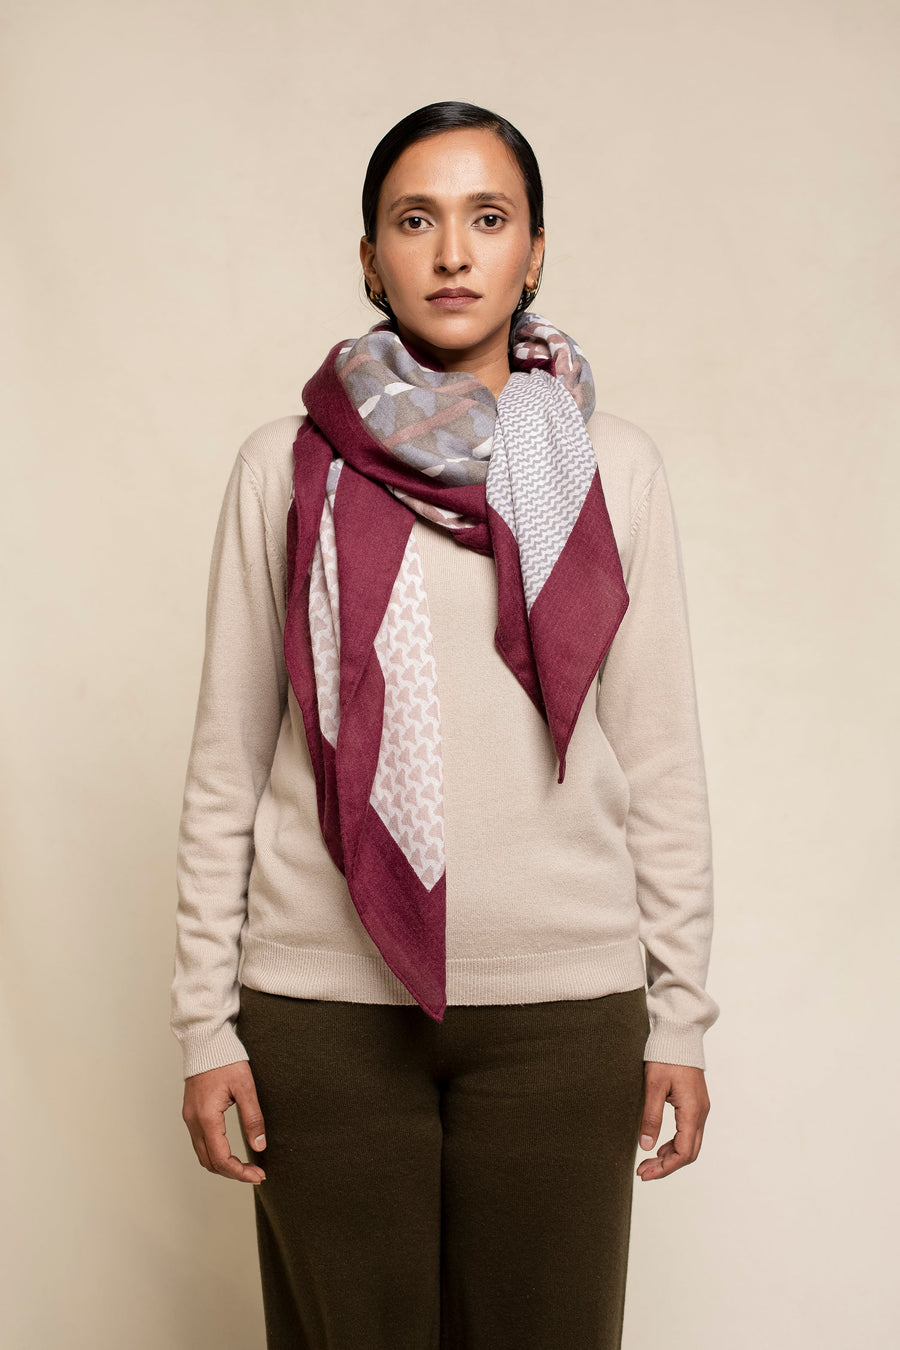 Micro Pattern Patch Printed Cashmere Square Scarf